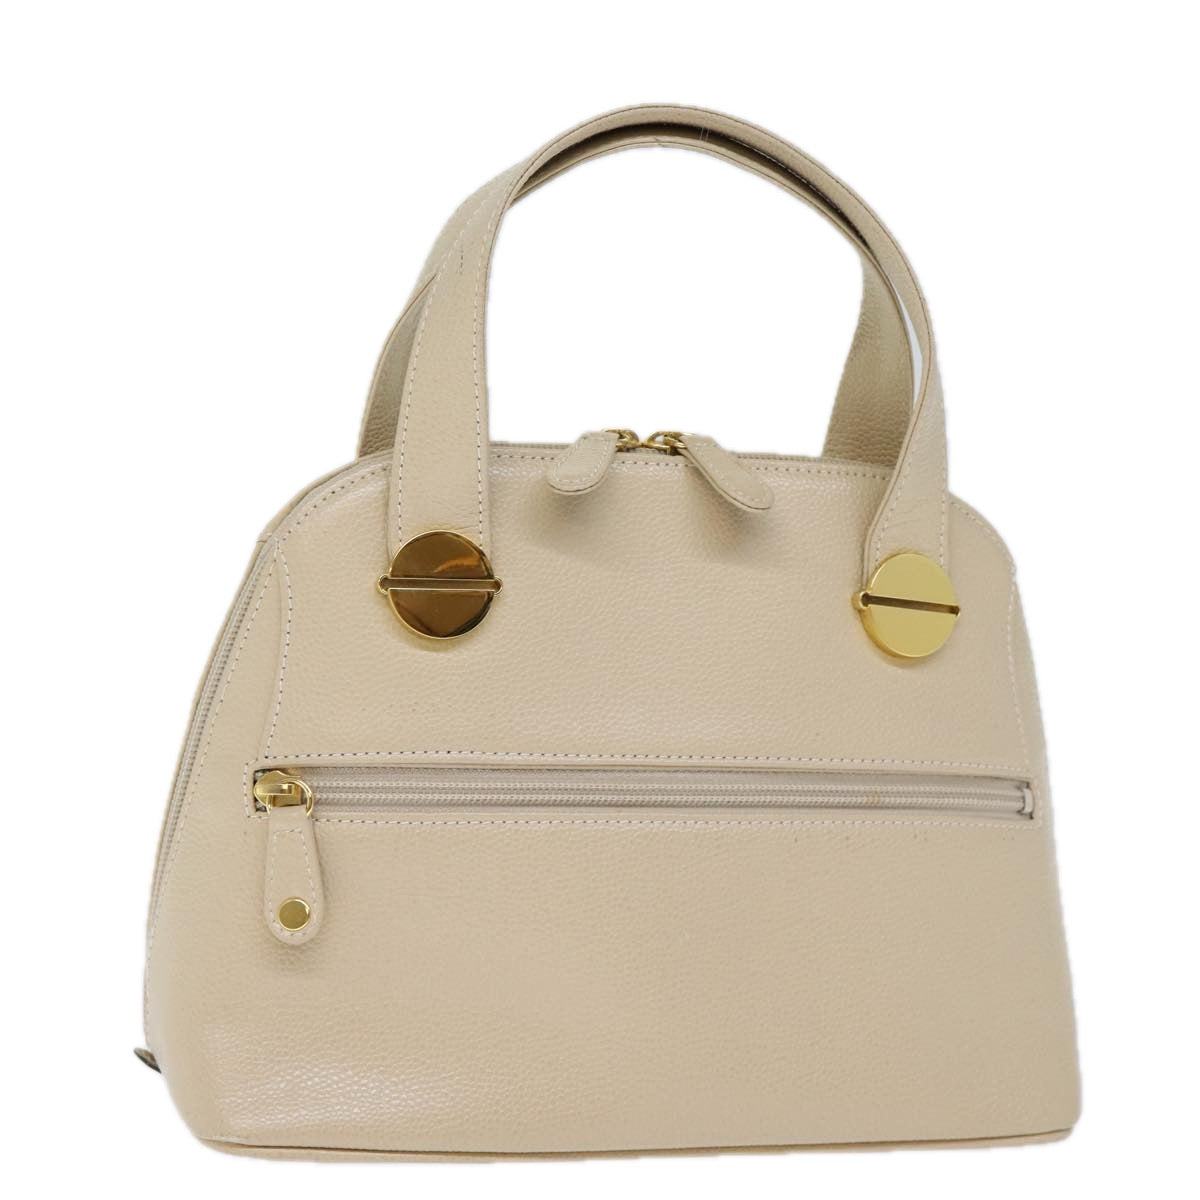 GIVENCHY Hand Bag Leather Beige Auth bs14017